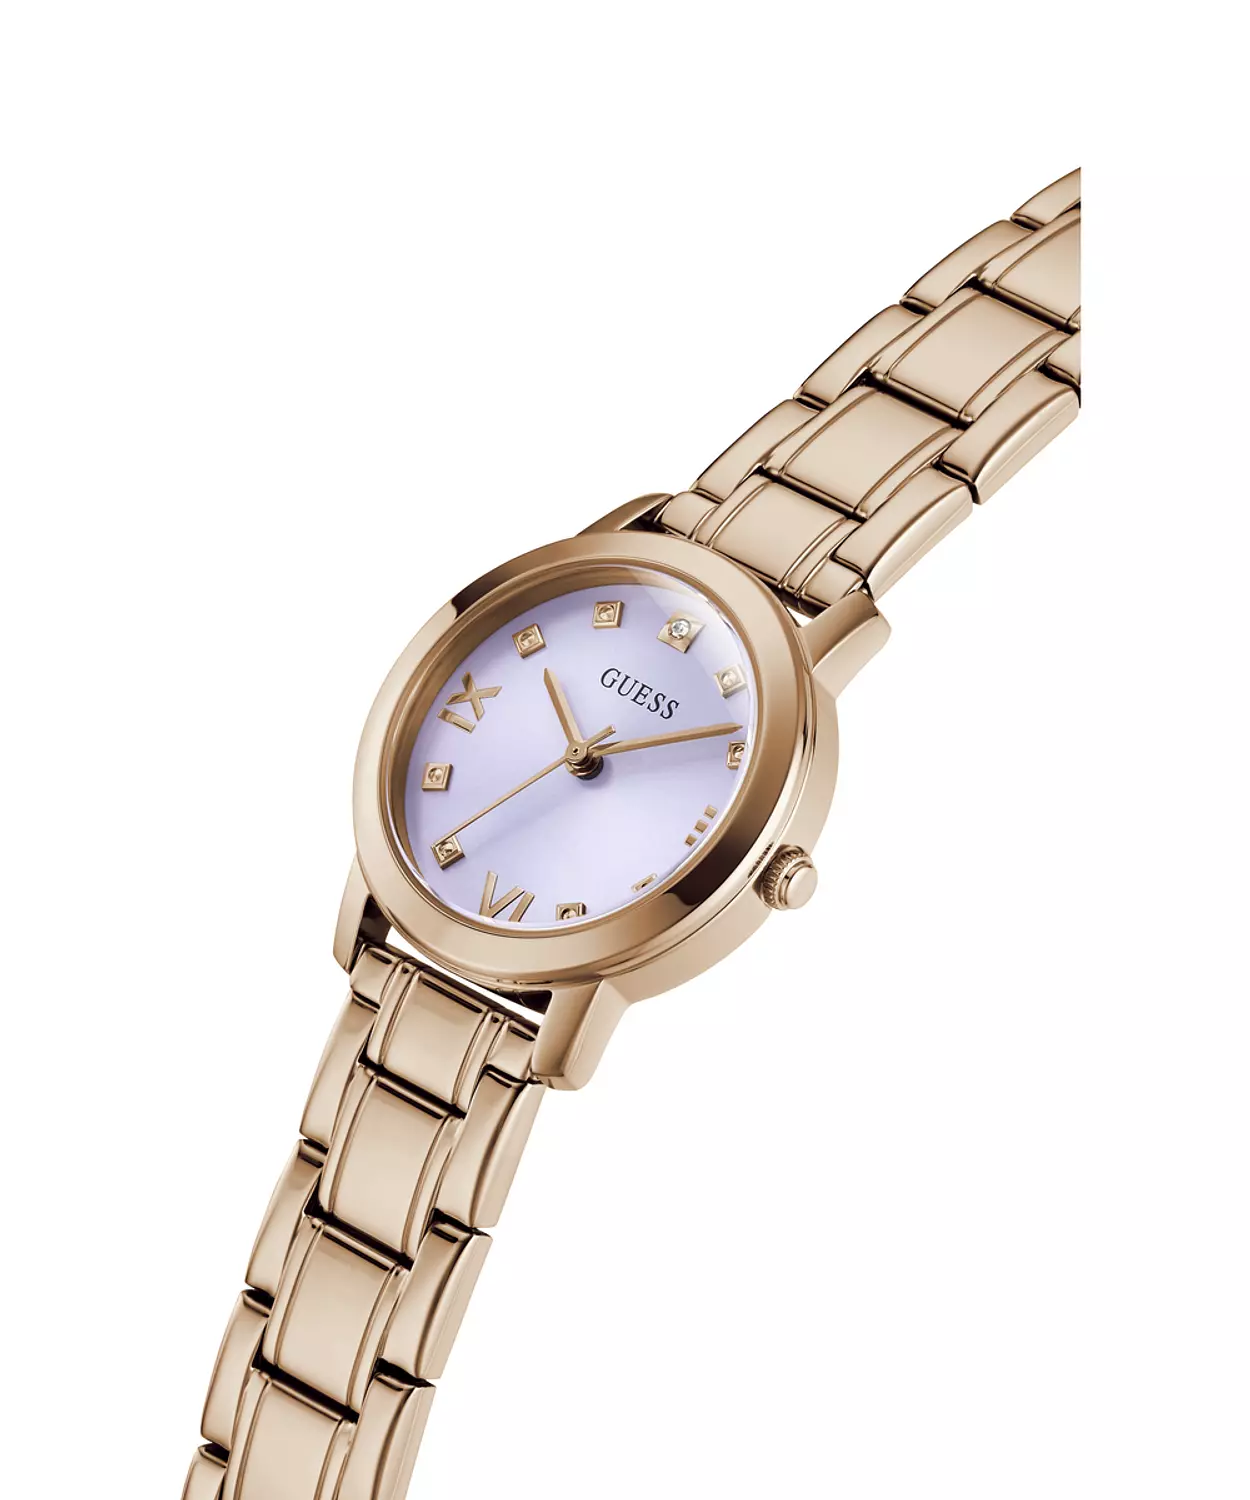 GUESS GW0532L3 ANALOG WATCH For Women Round Shape Rose Gold Stainless Steel Polished Bracelet 2